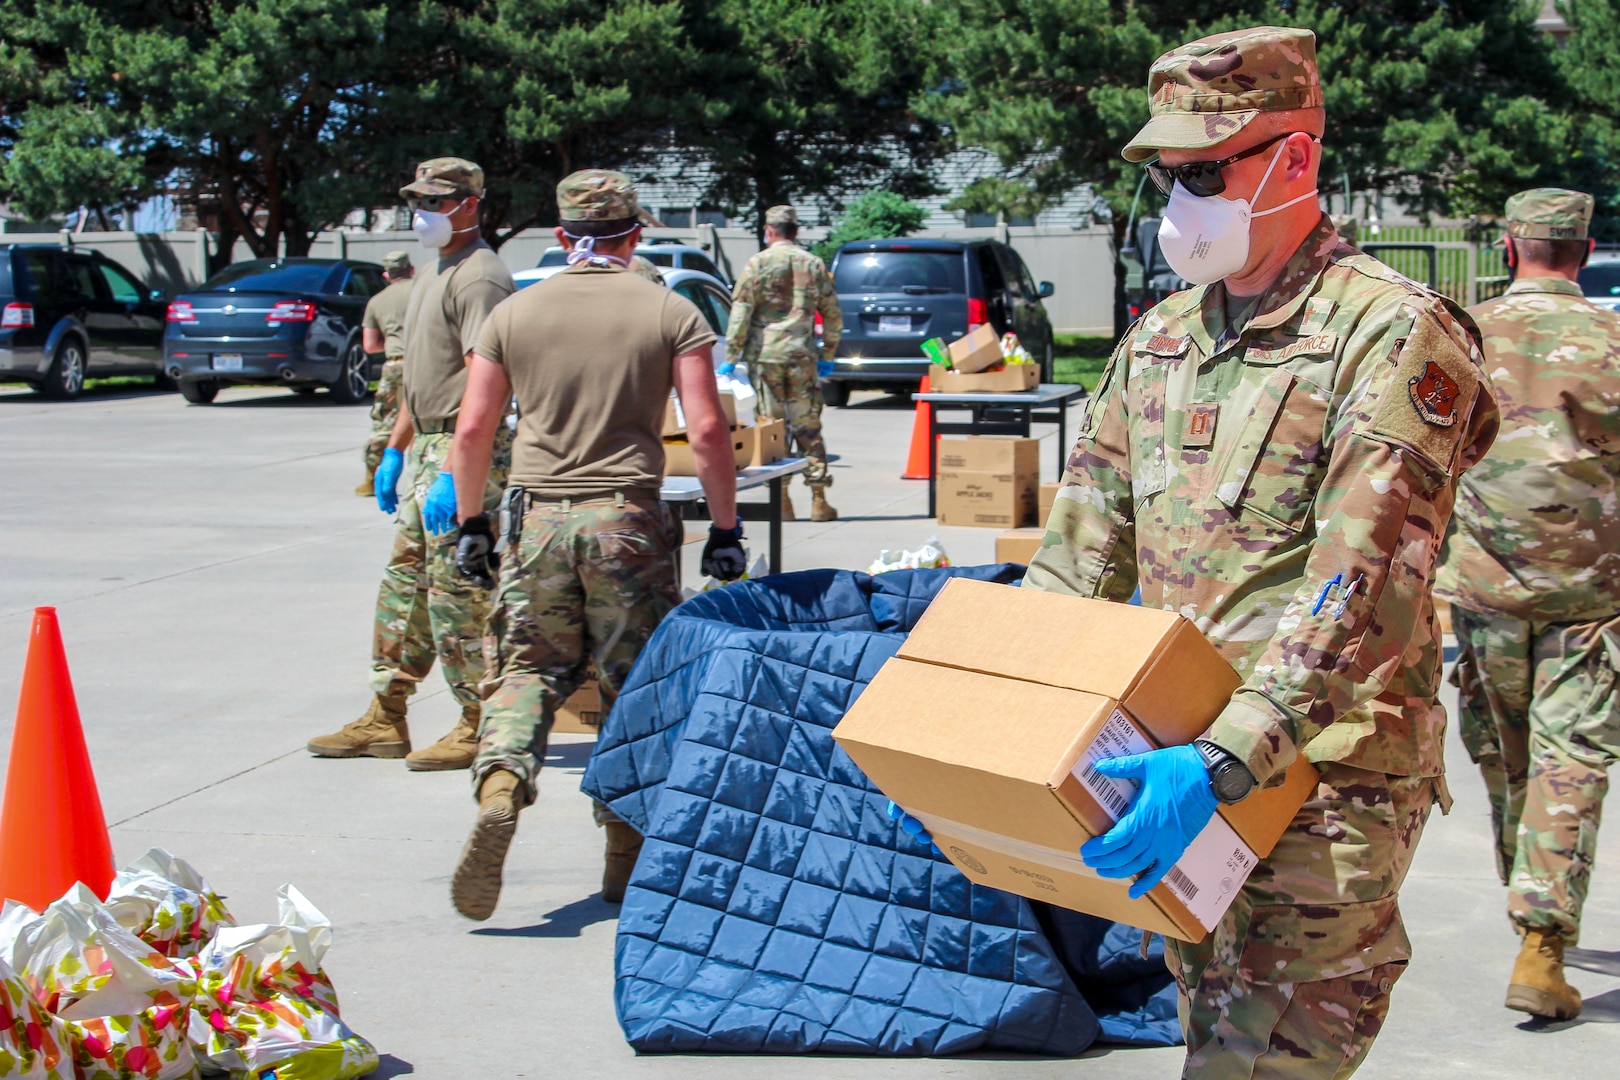 Capt. Michael Zimmer, a chaplain with the Nebraska Air National Guard, helps distribute food to families in need during a Food Bank of Lincoln mobile pantry event, June 3, 2020, in Waverly, Nebraska. As the chaplain for the Joint Task Force Nebraska National Guard COVID-19 mission, Zimmer speaks with troops to check on their mental and spiritual welfare.